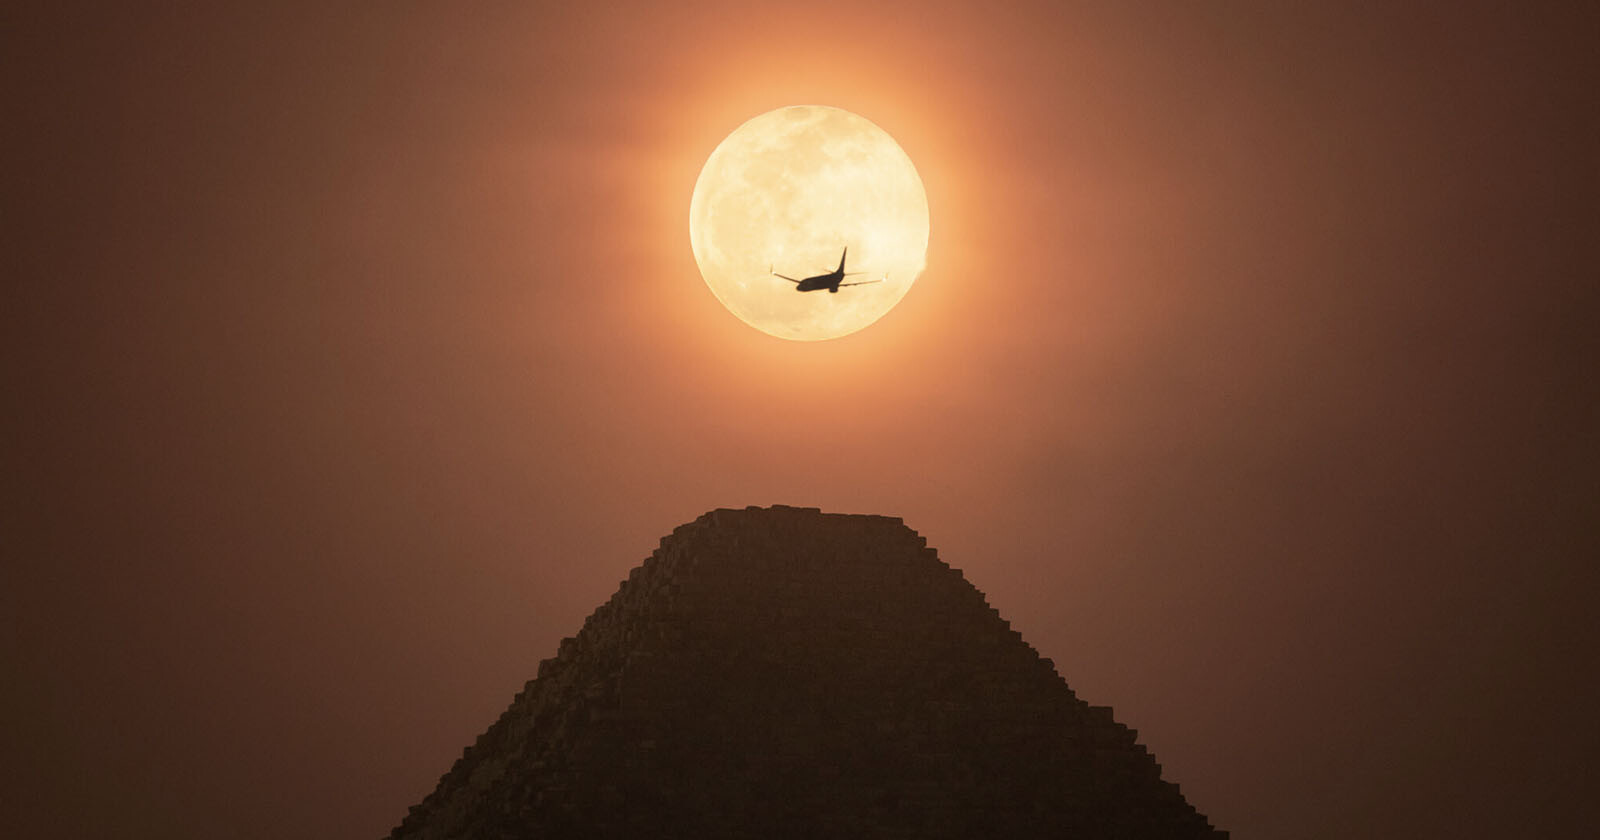 An airplane silhouetted against the Moon above the Great Pyramid of Giza.